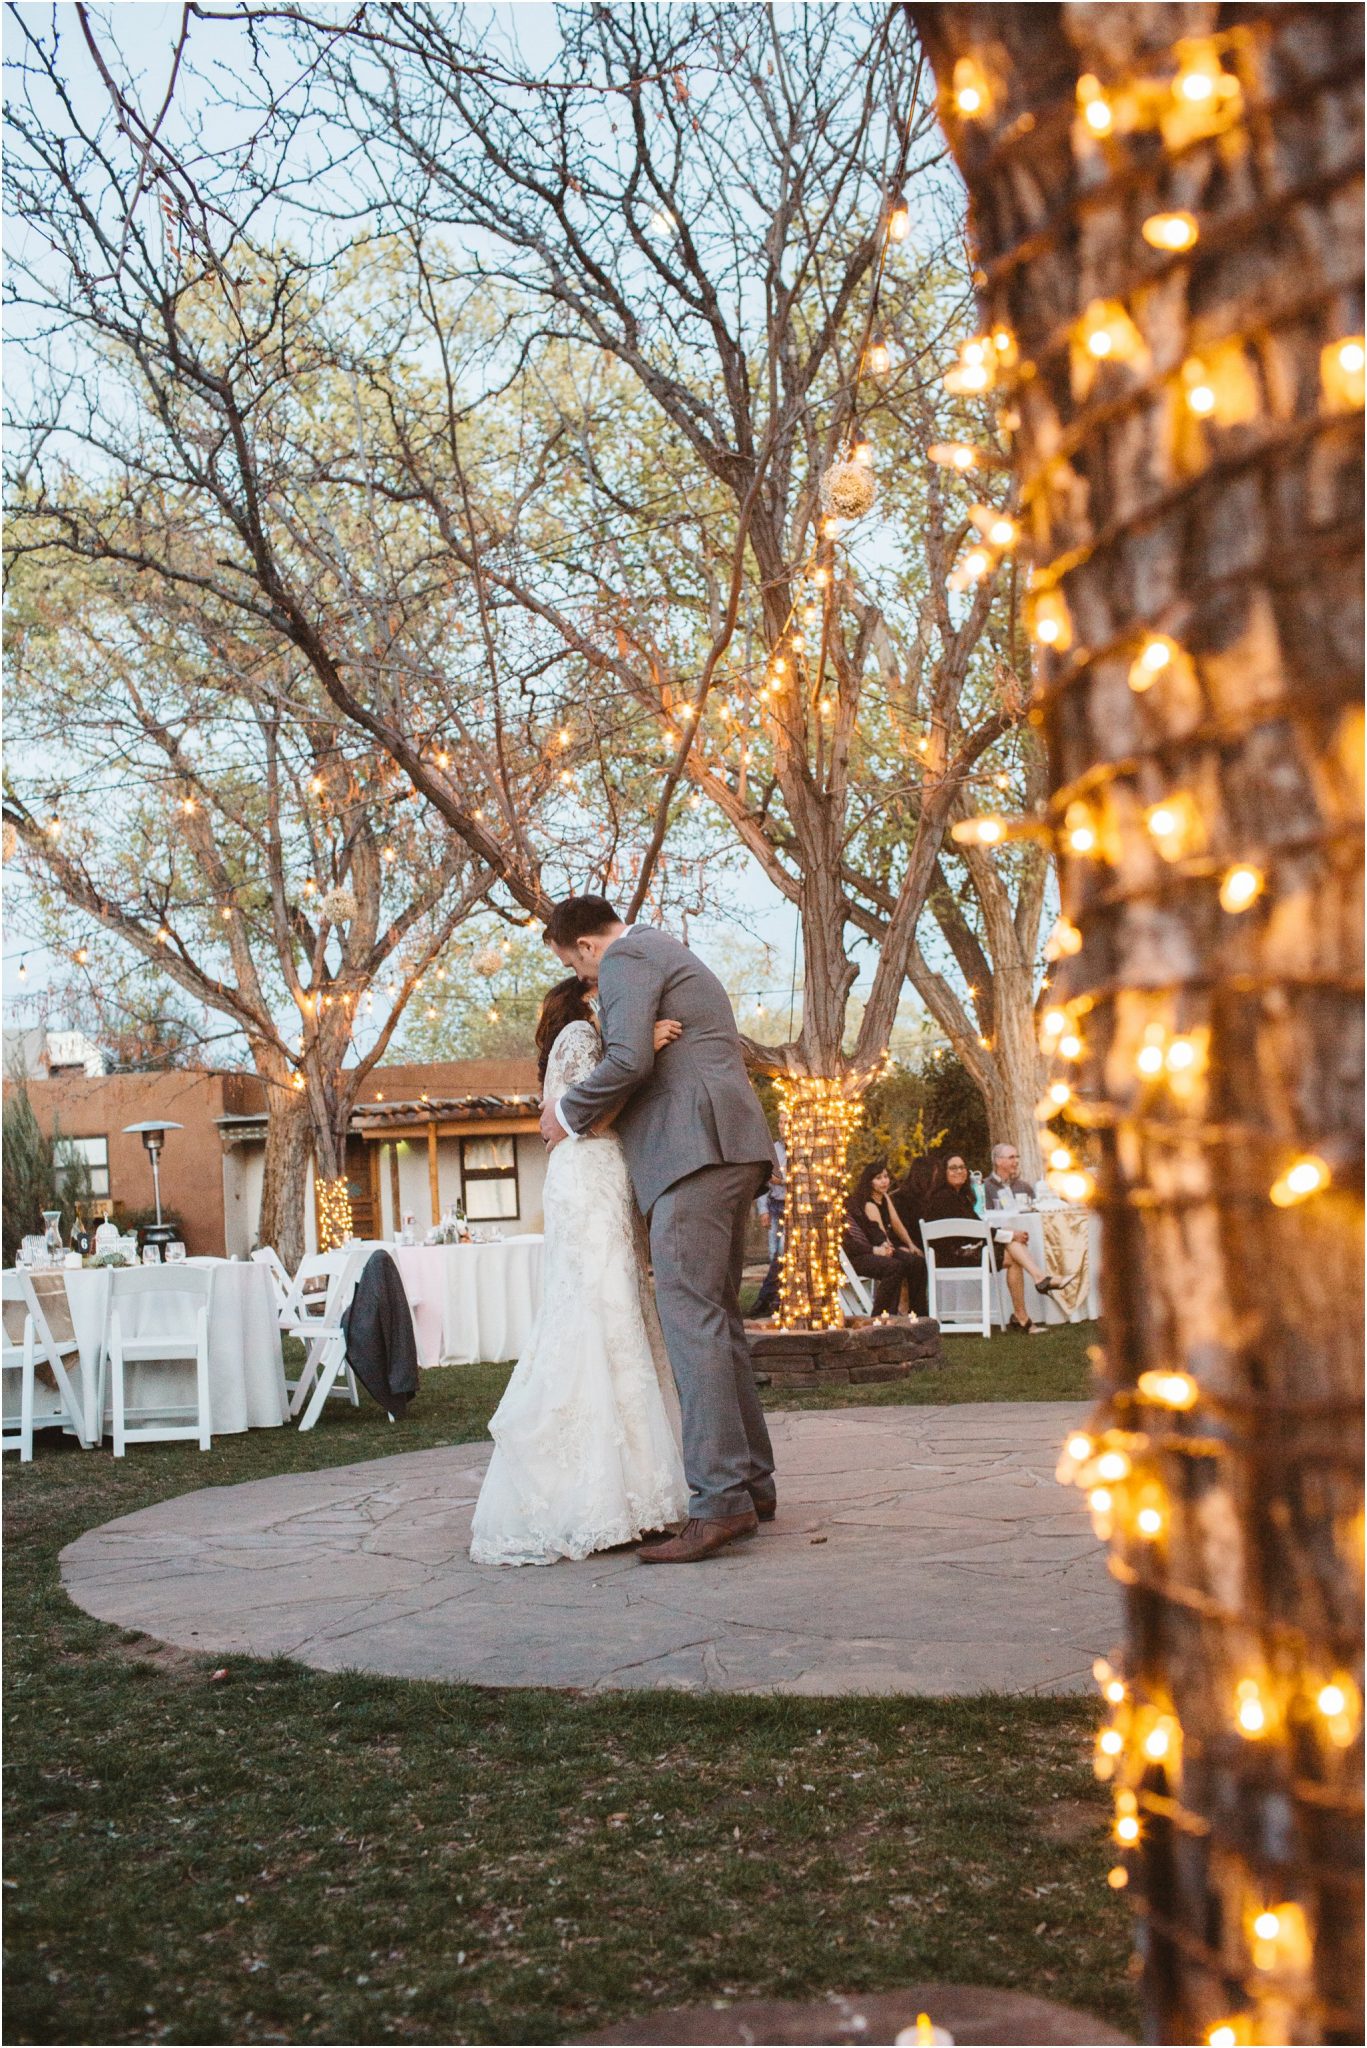 Albuquerque Wedding Photographer Blue Rose Photography Studio_ Top New Mexico Wedding pictures and photographers